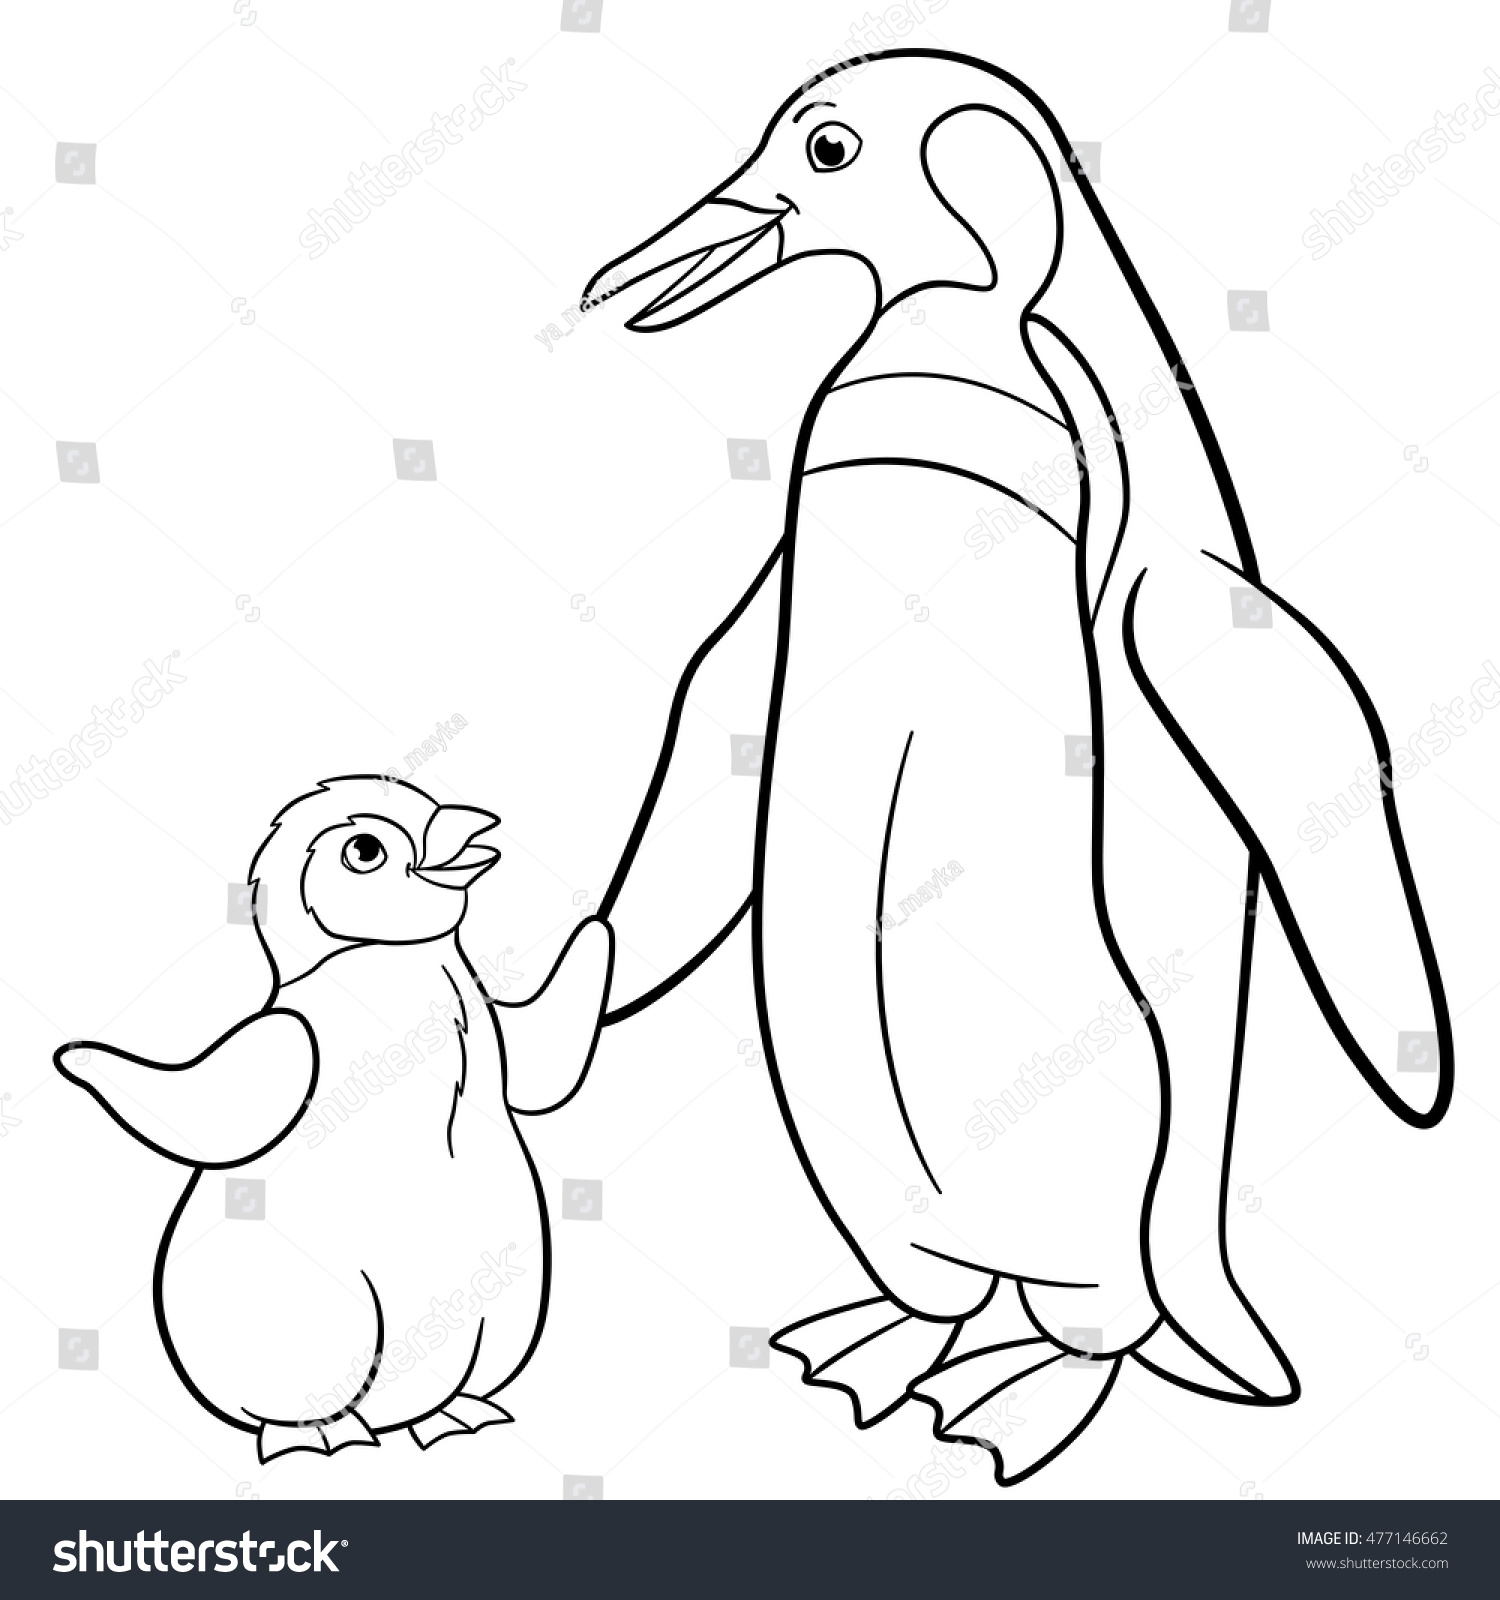 Coloring pages Mother penguin with her little cute baby